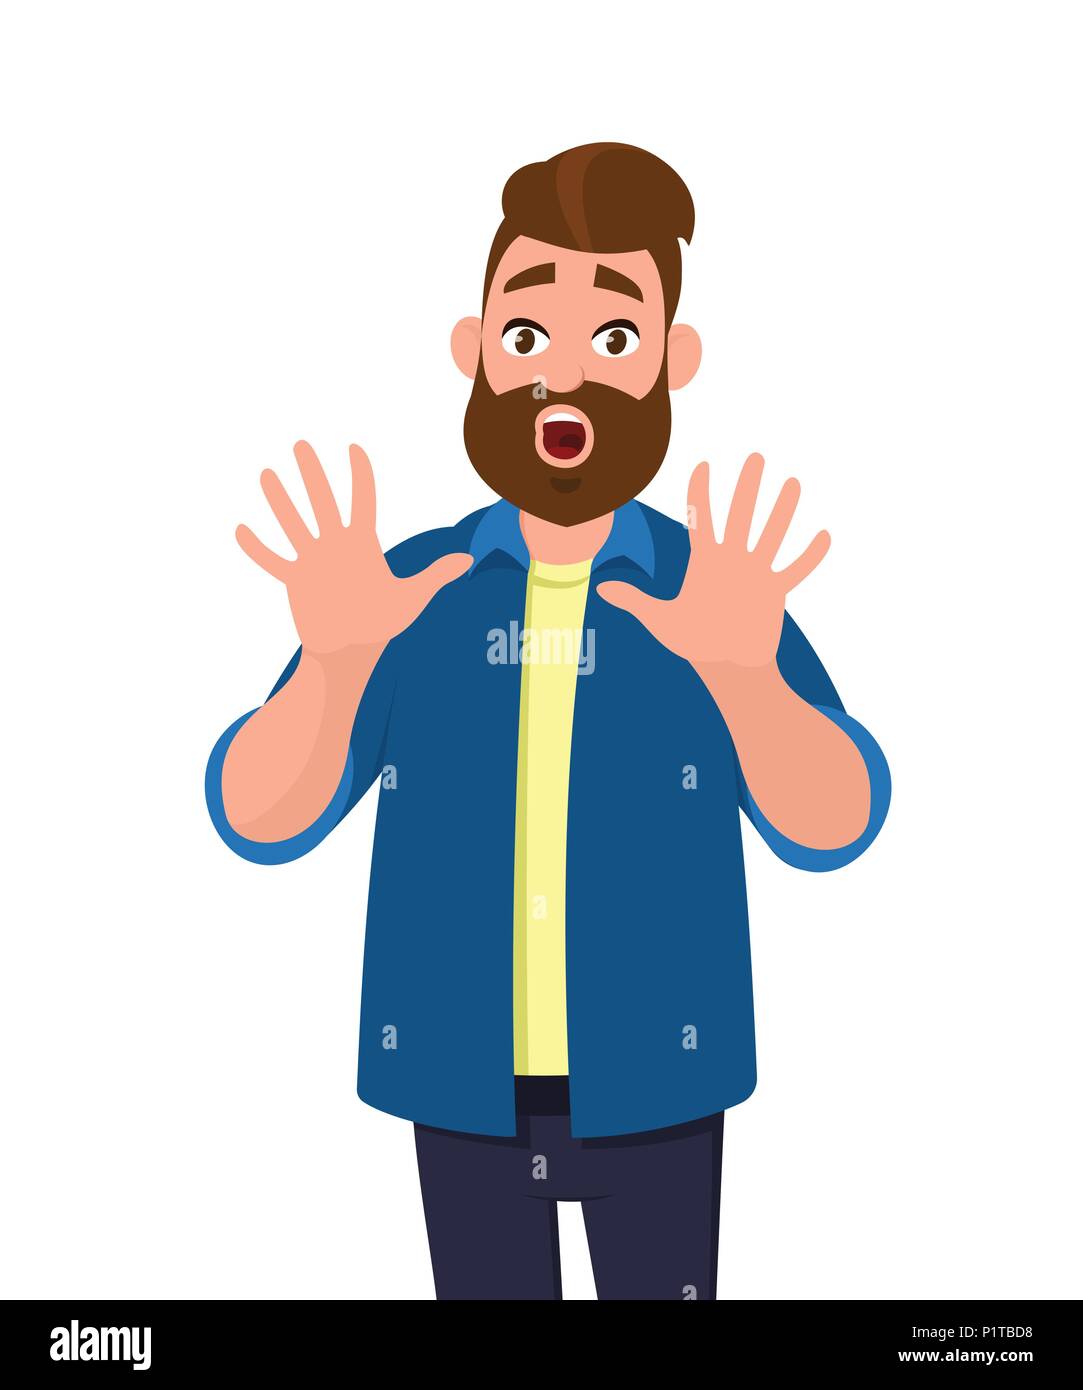 Man with scared expression on his face making frightened gesture with his palms as if trying to defend himself from someone. Young man making a scared. Stock Vector